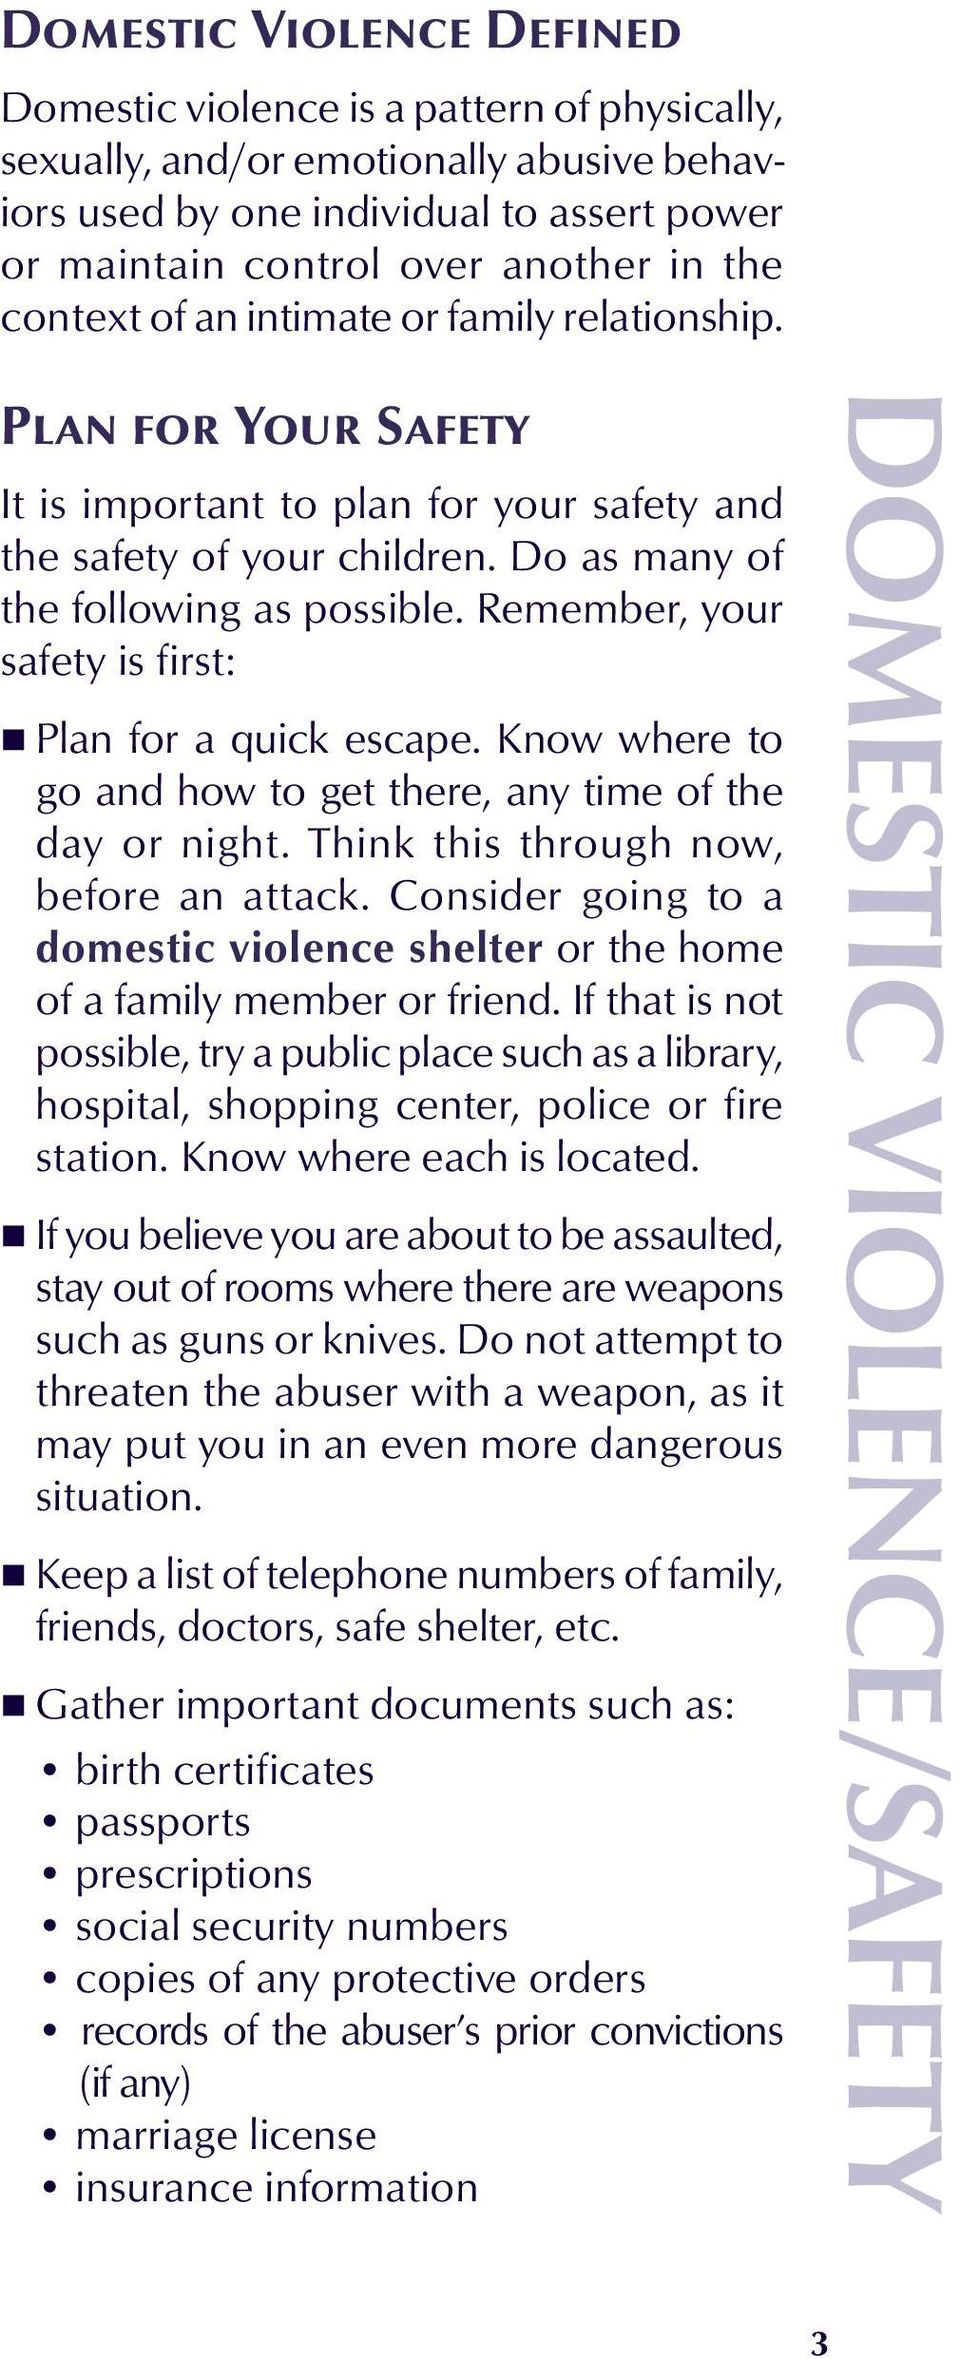 Do as many of the following as possible. Remember, your safety is first: Plan for a quick escape. Know where to go and how to get there, any time of the day or night.